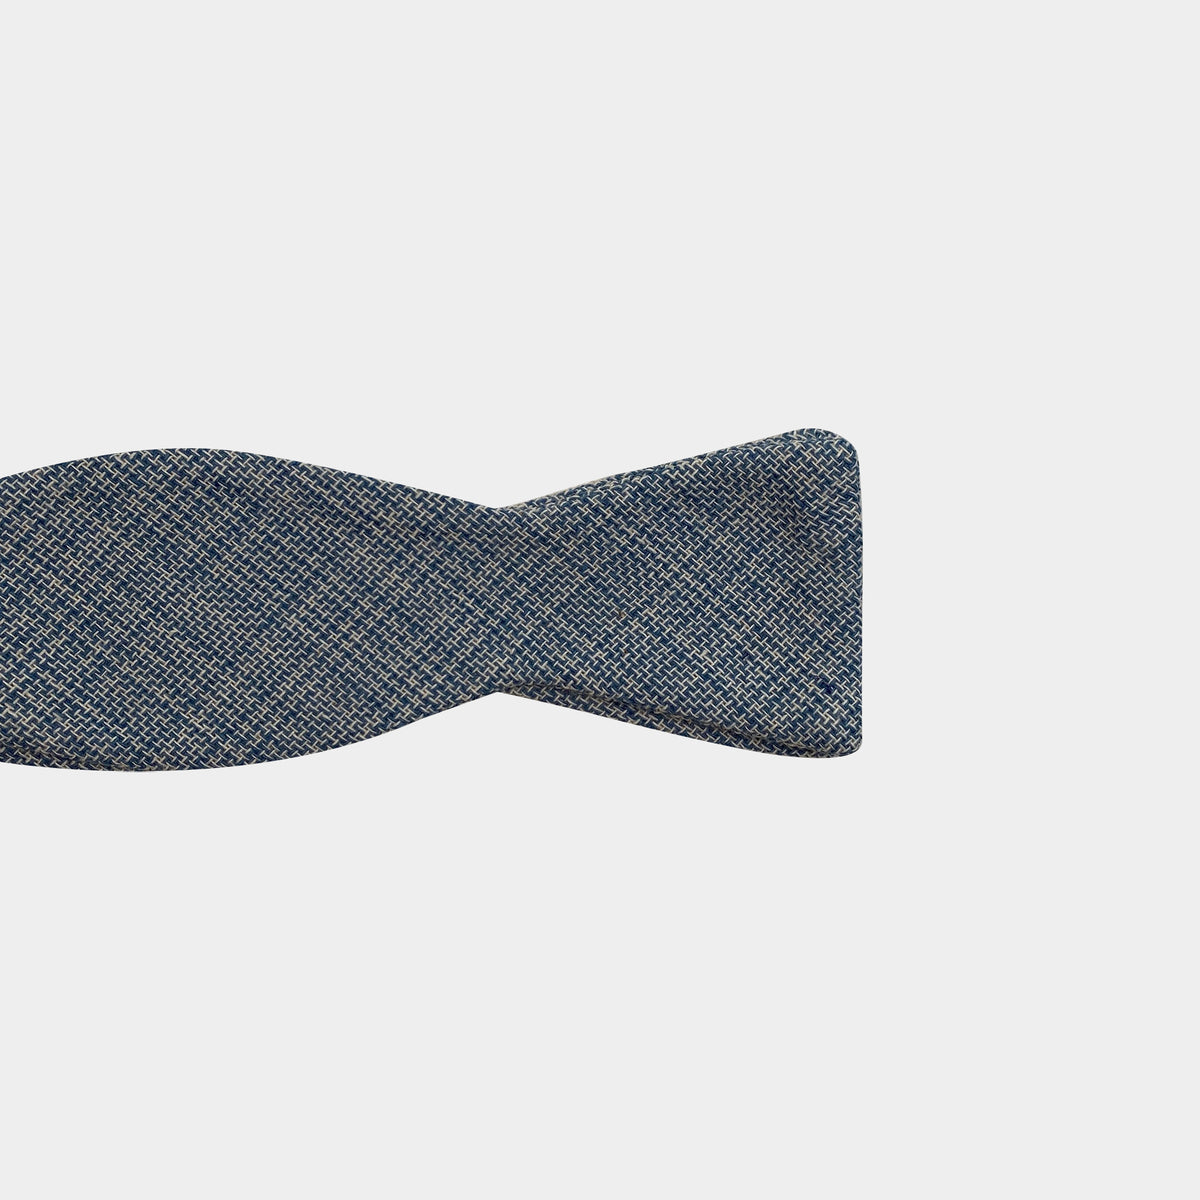 YOUNG || SELF-TIE BOW TIE